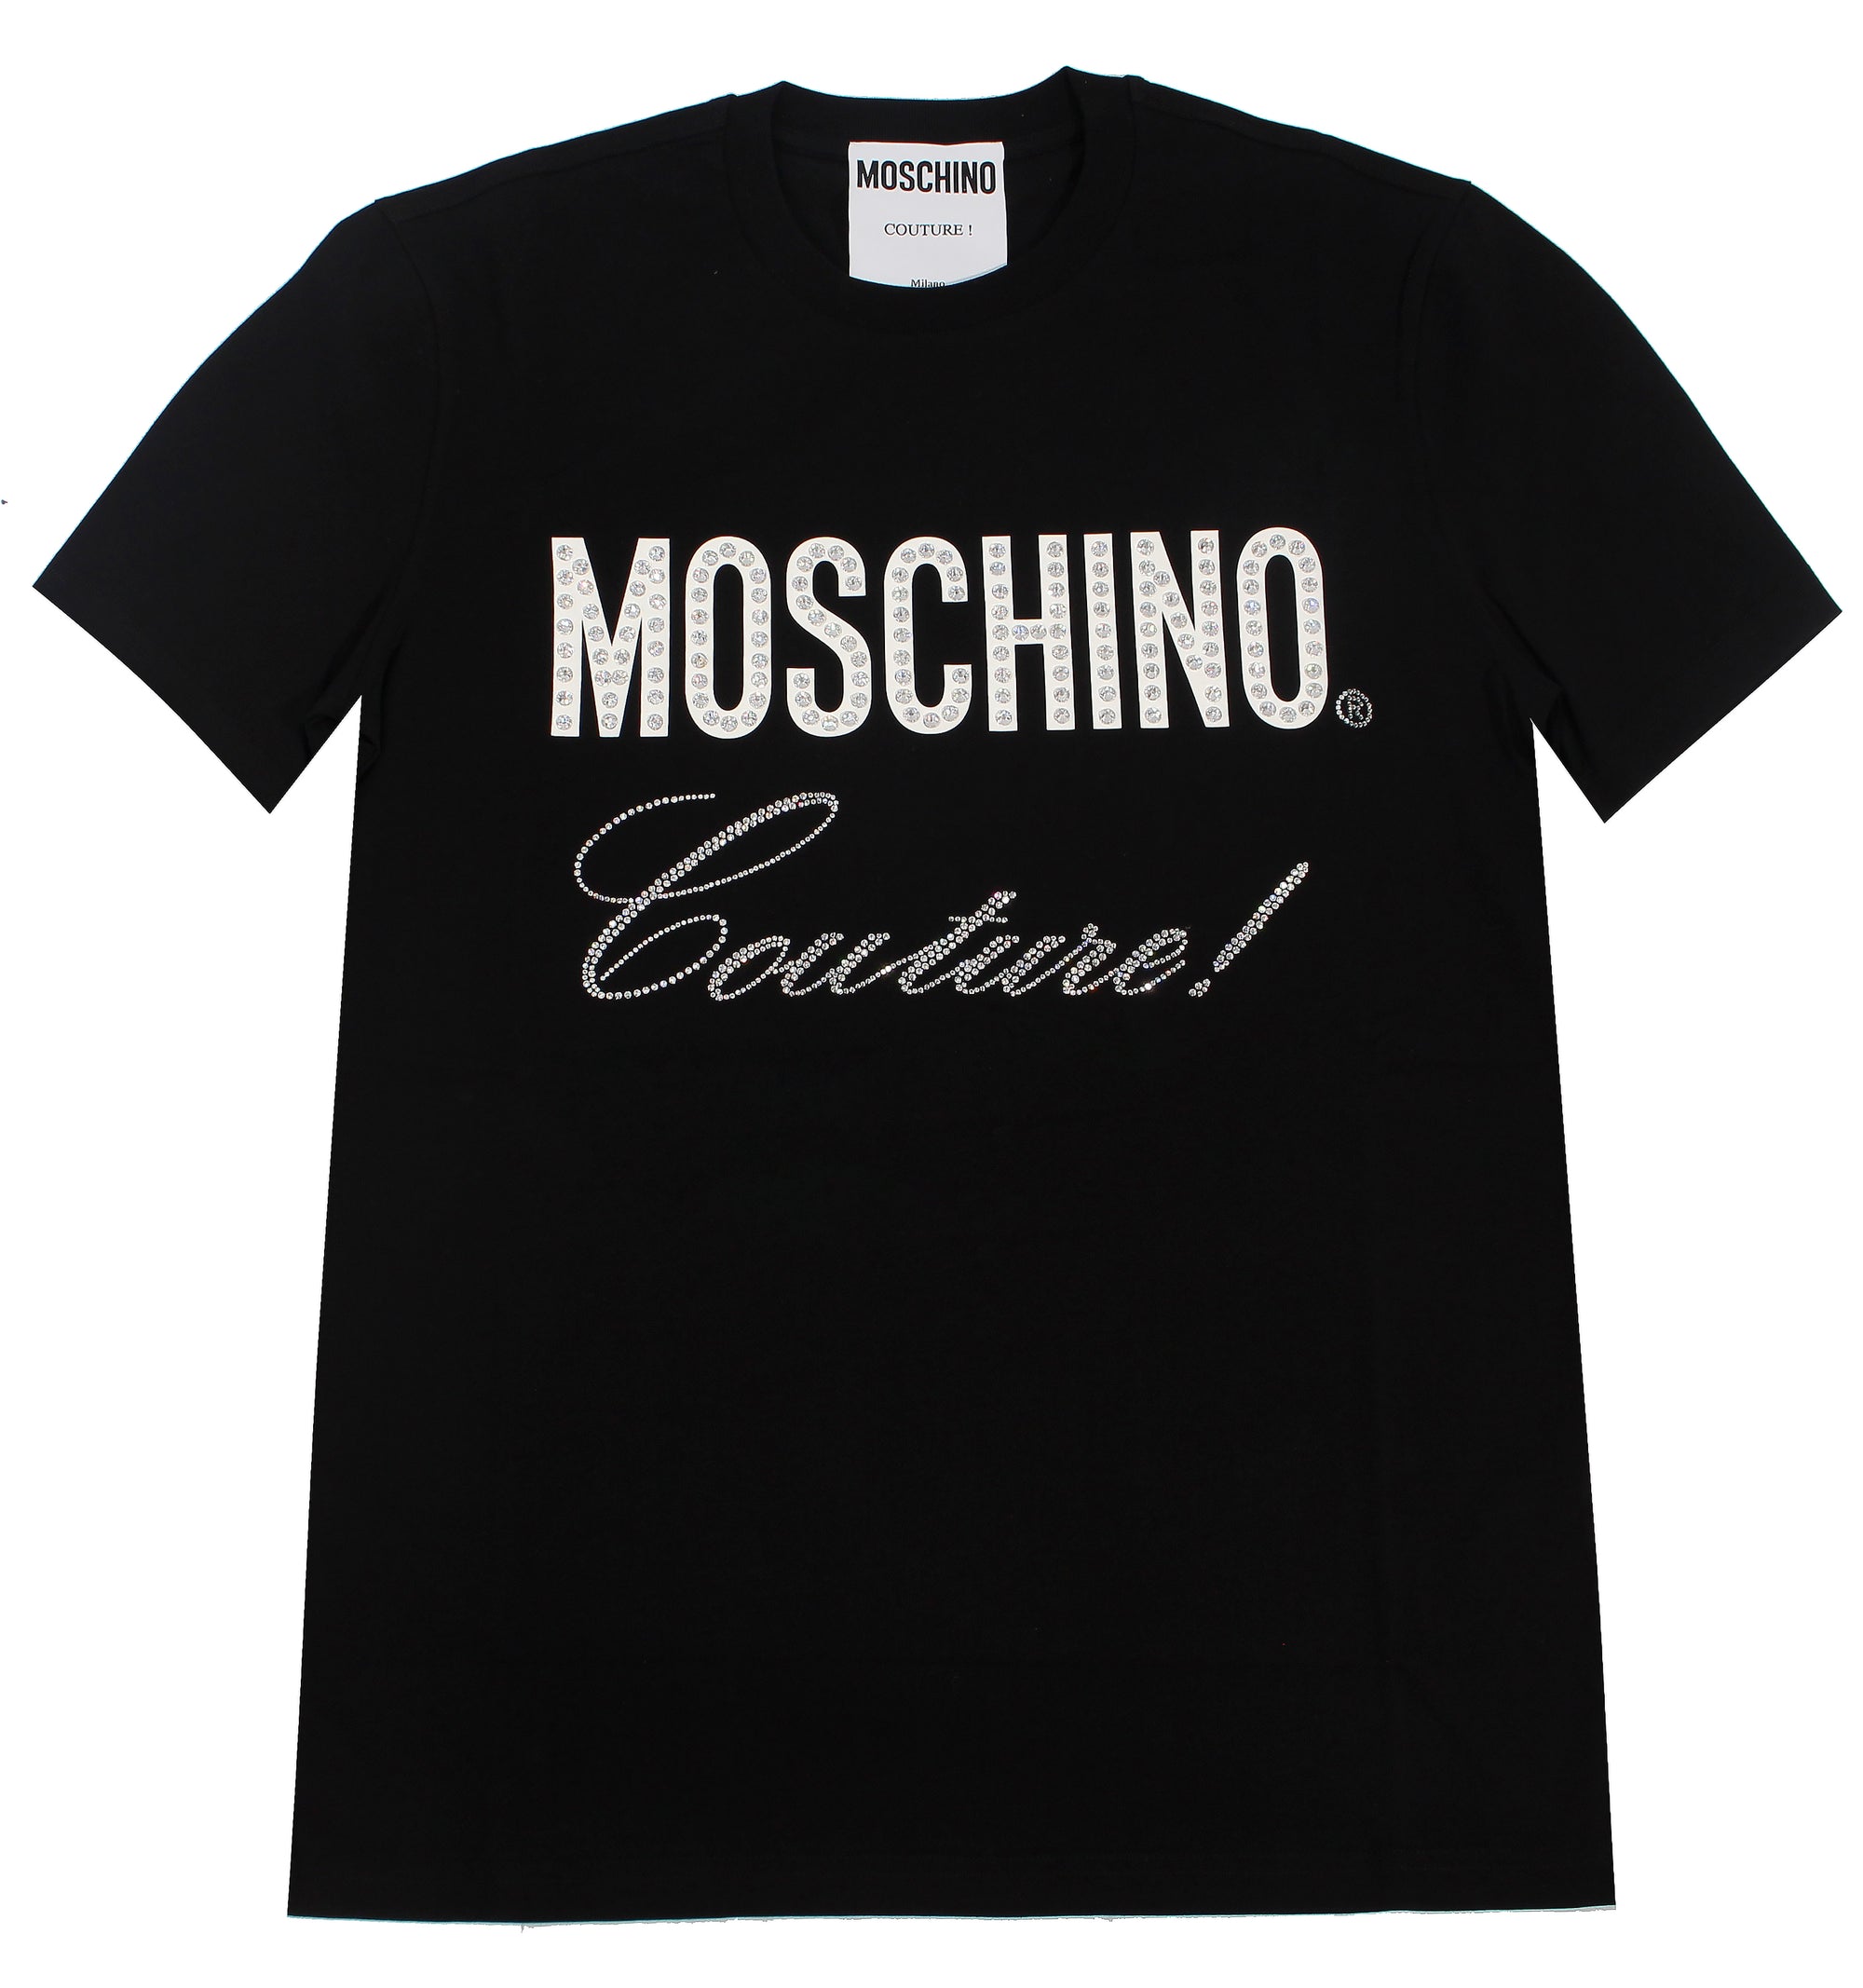 Moschino Couture Embellished Tee - Black